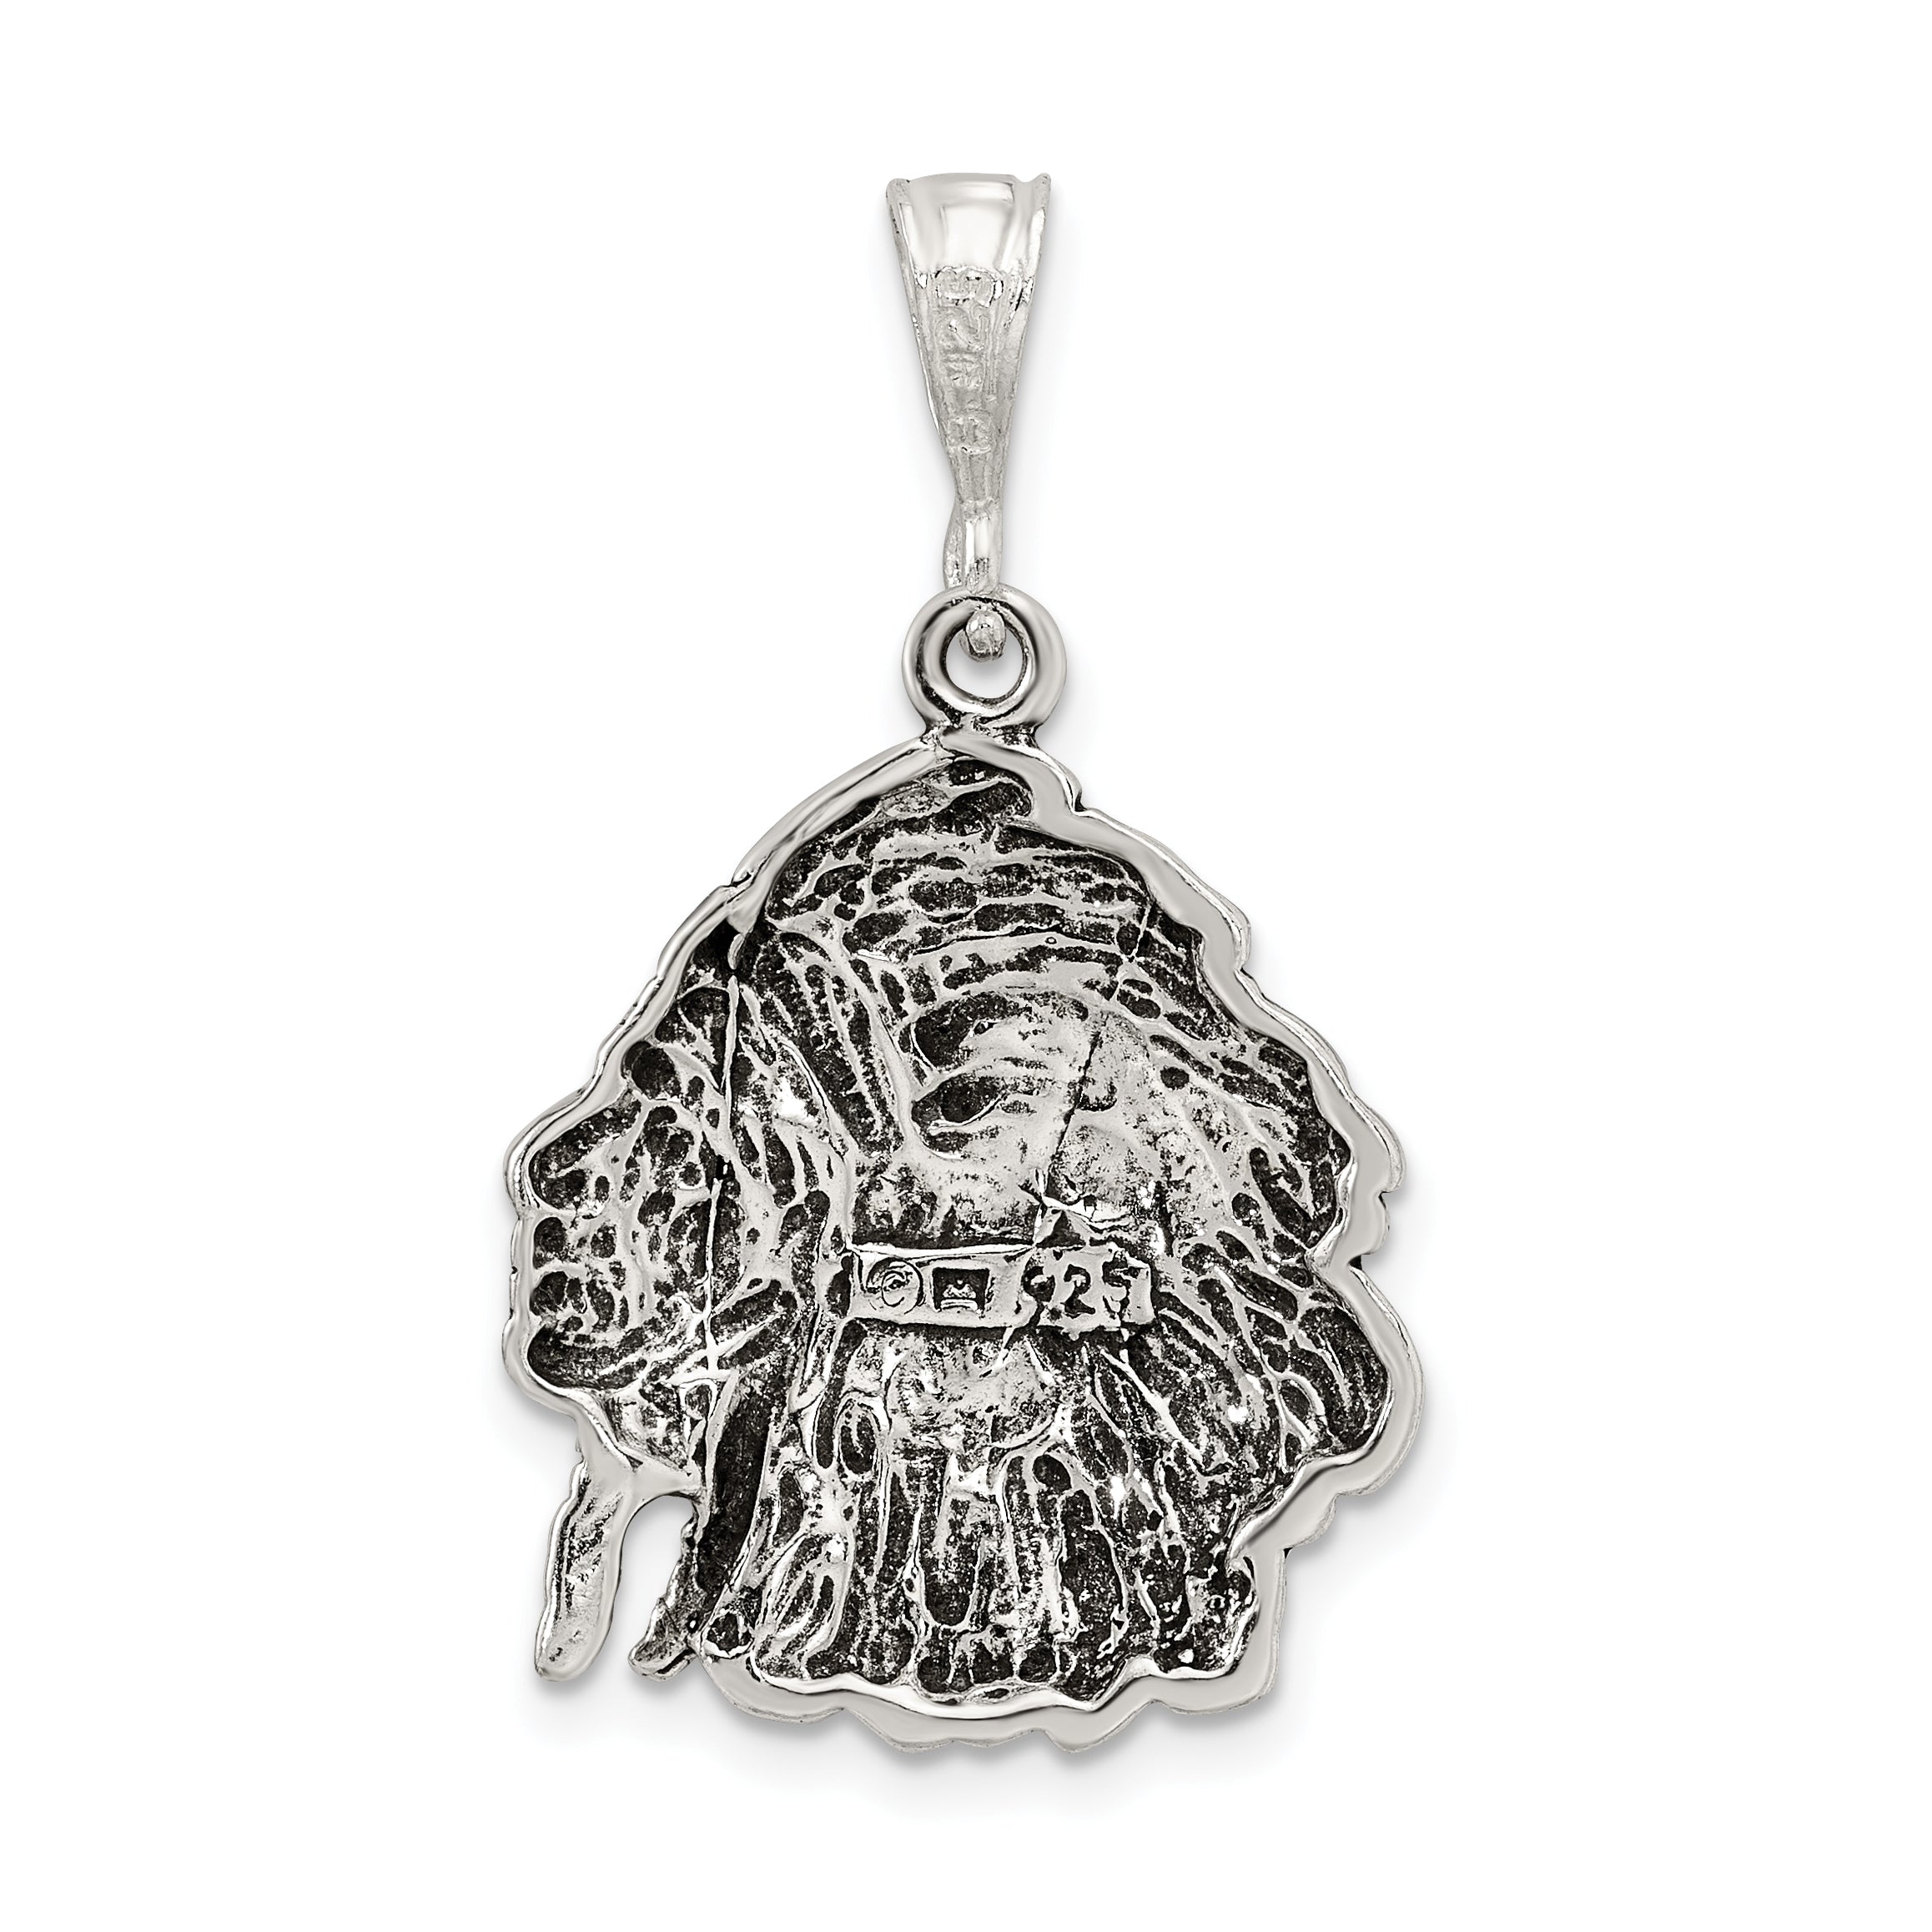 Sterling Silver Antiqued Man Charm